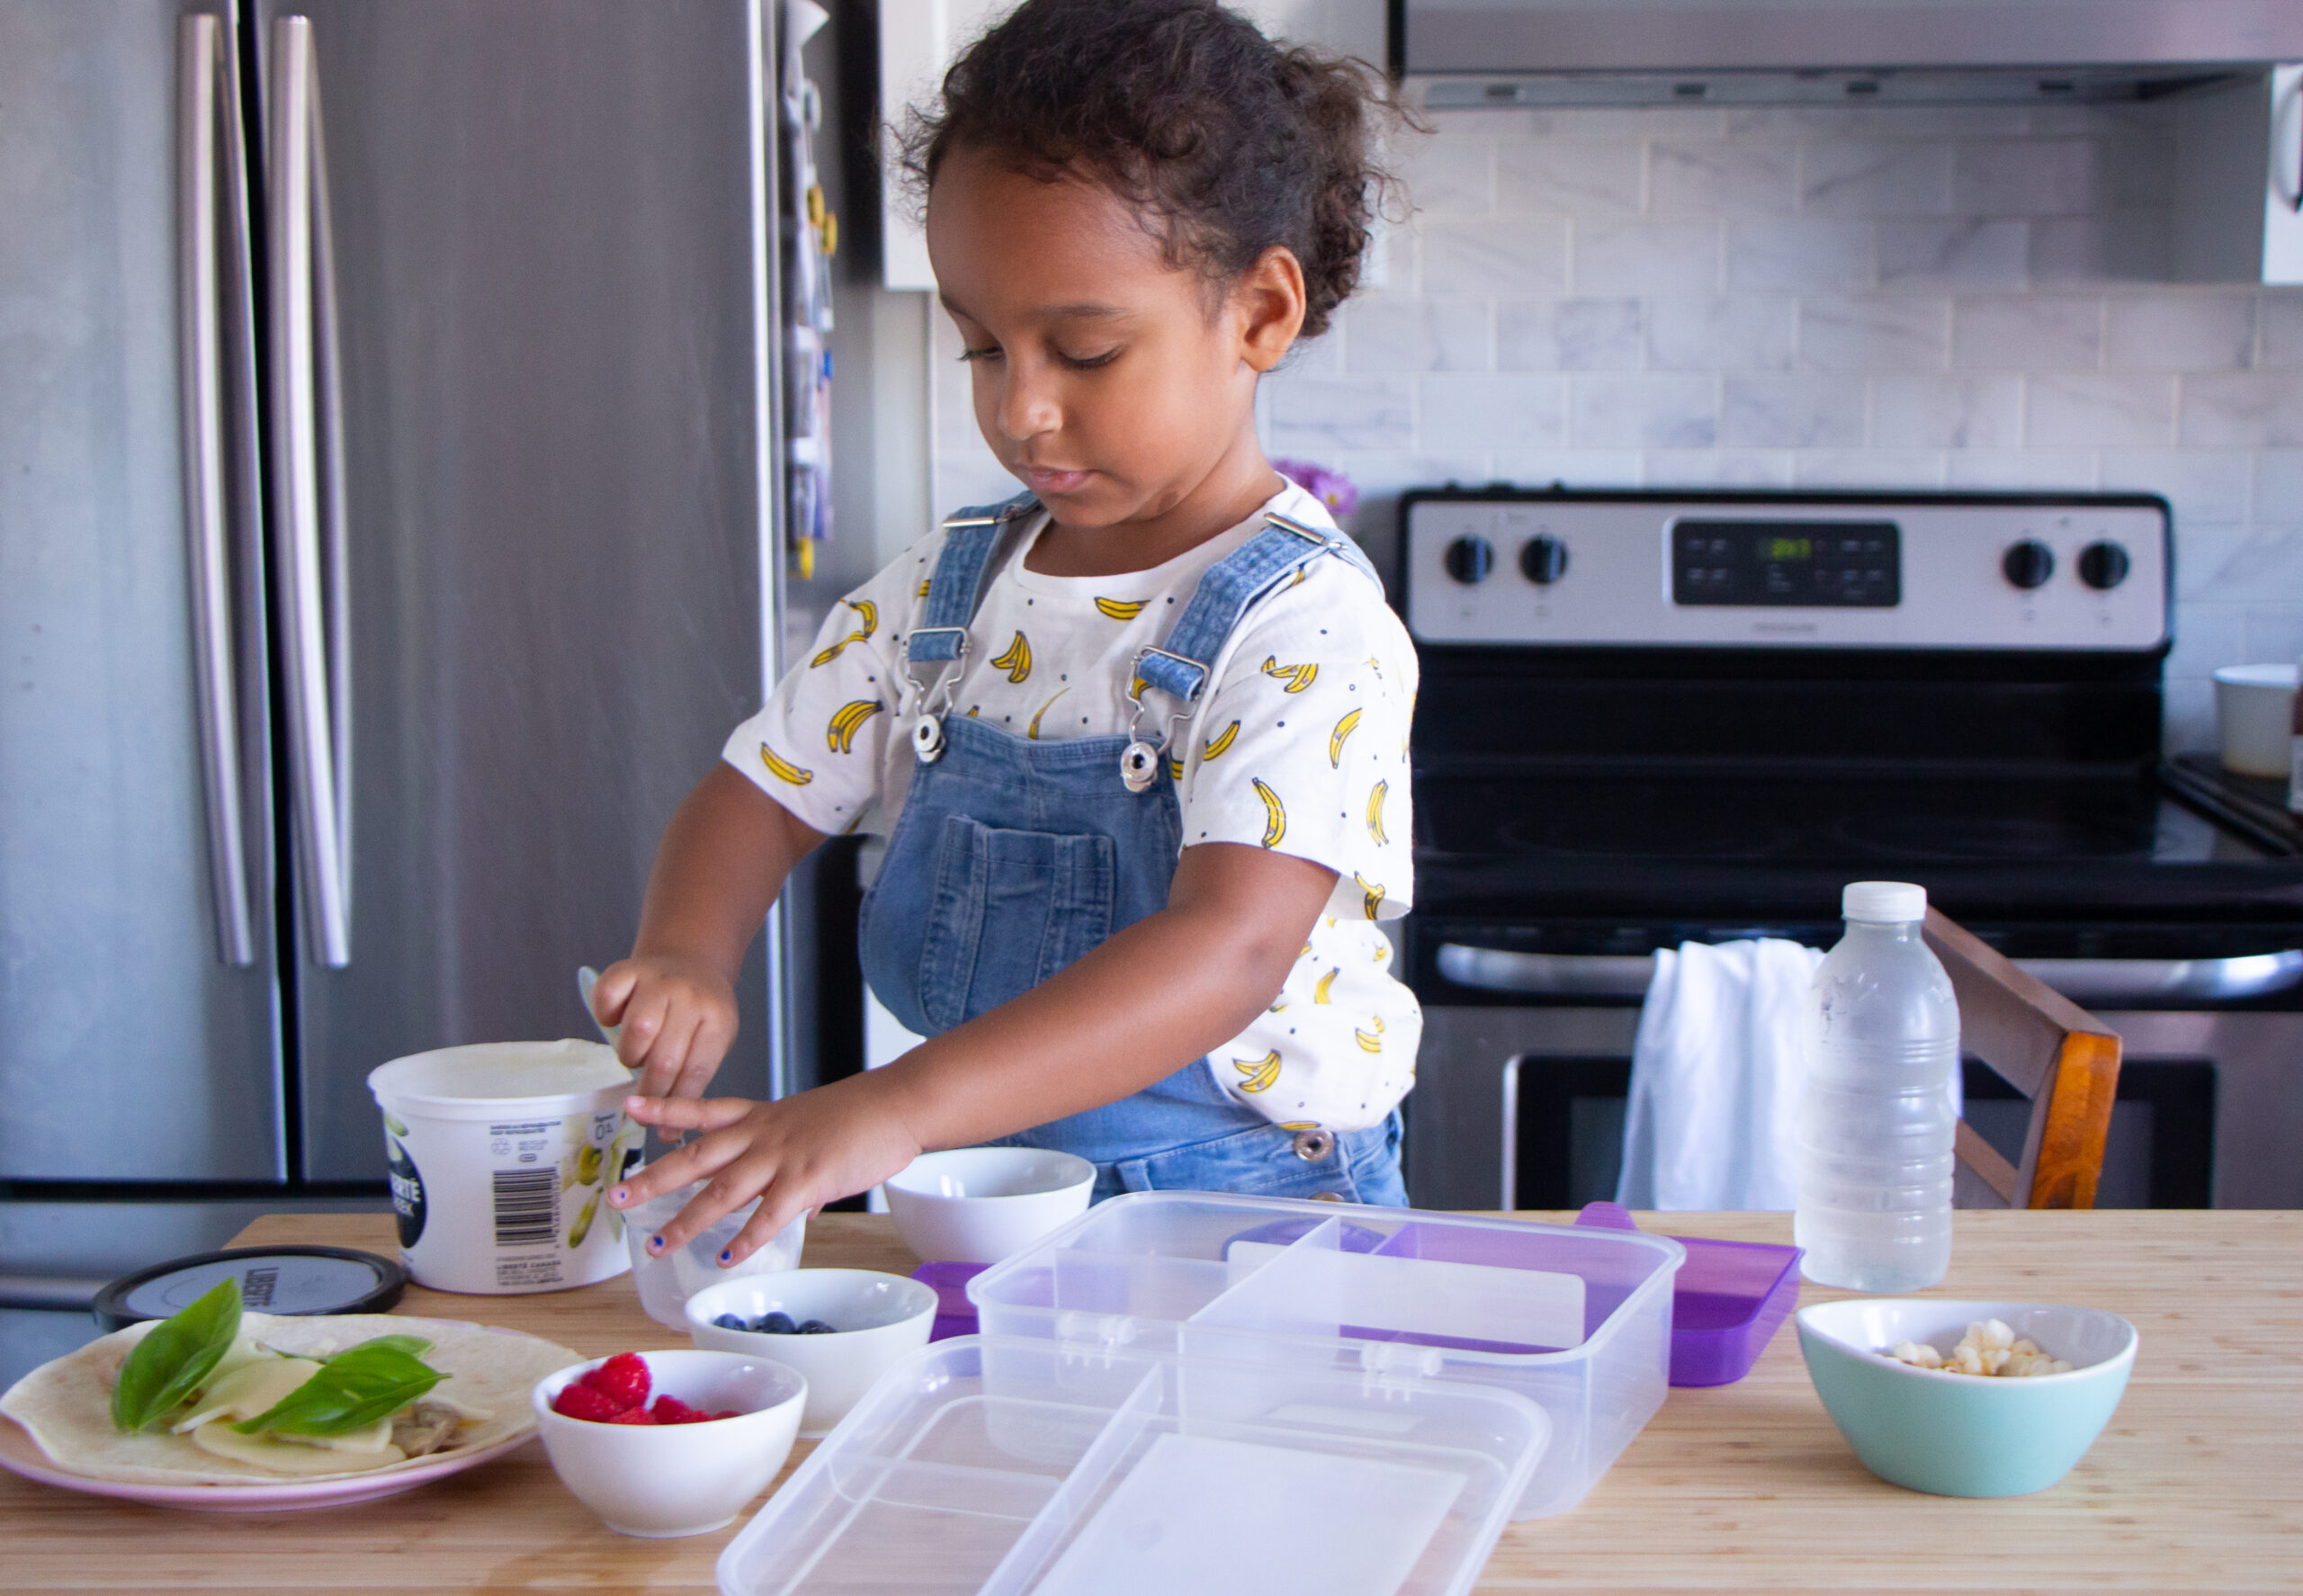 Lunch Packing Tips for Picky Eaters